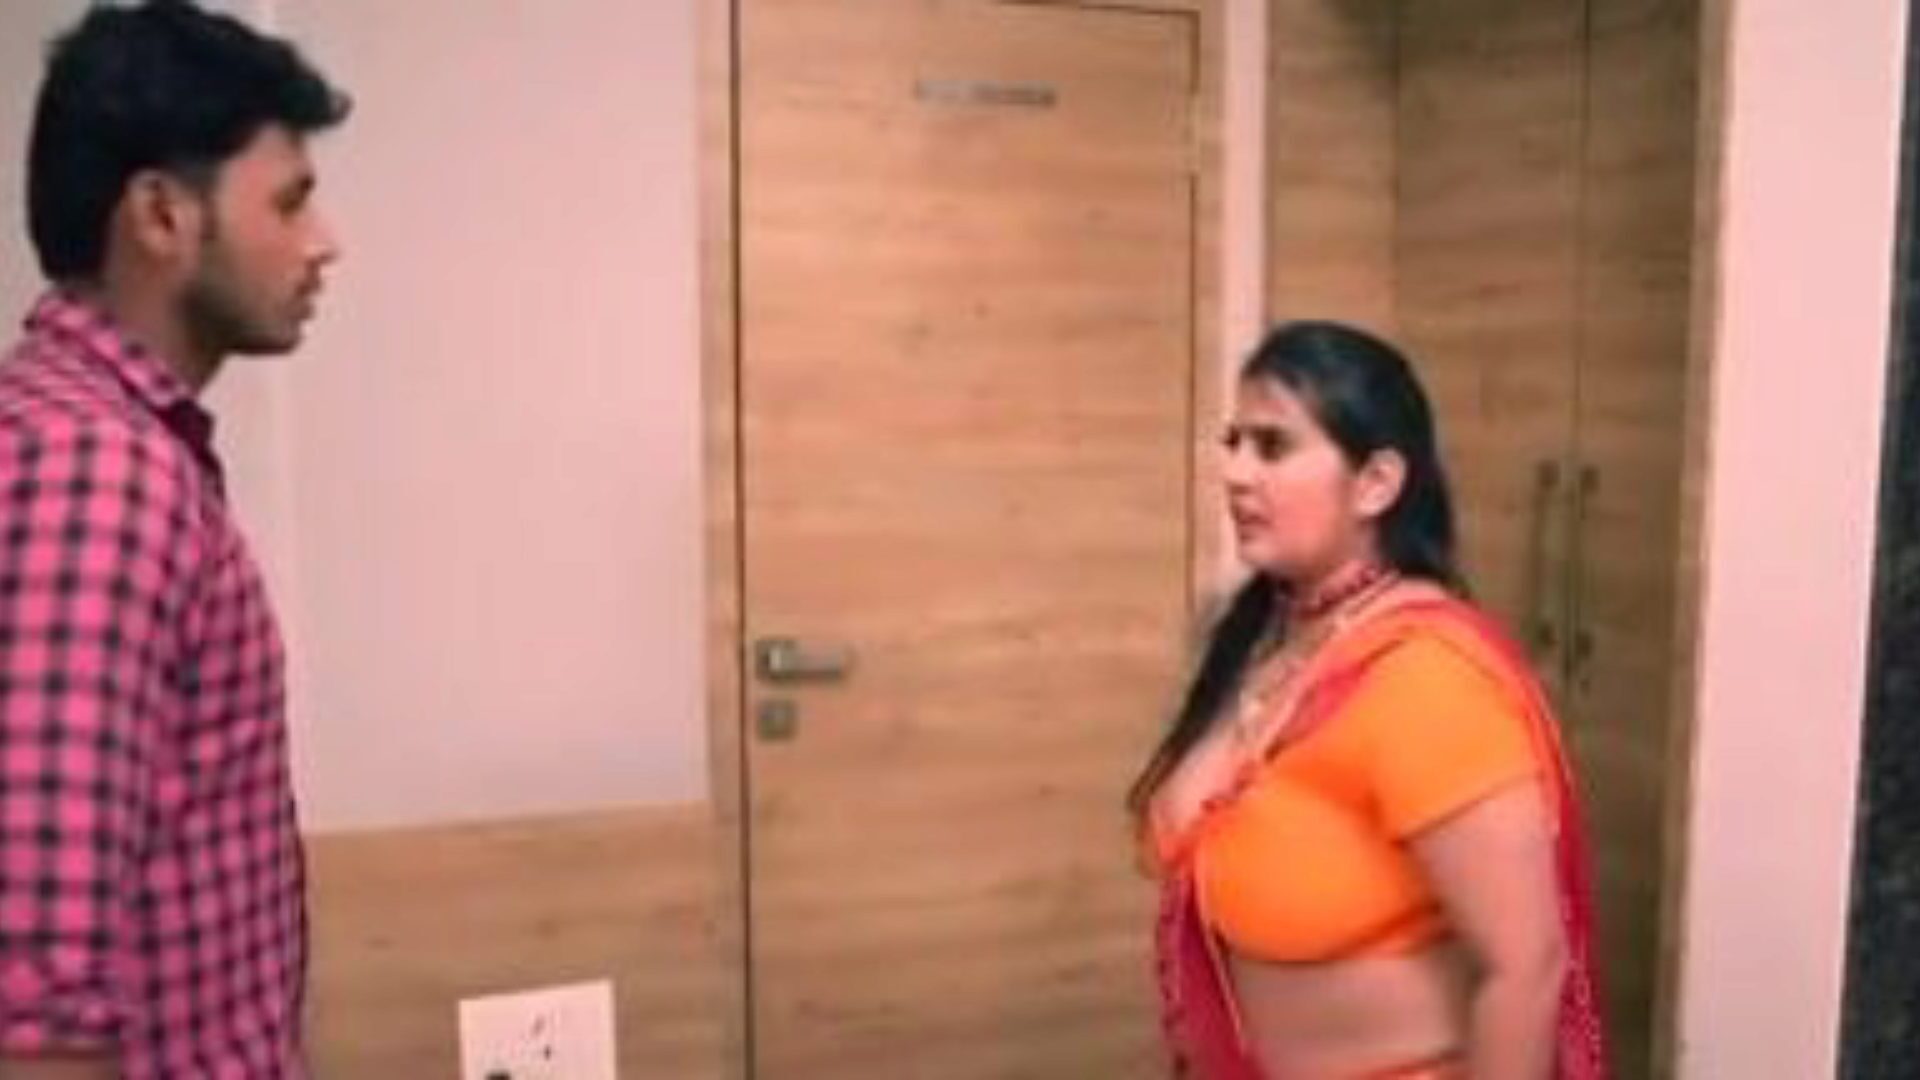 kanchan aunty ep5: free aunty xxx porn video 03 - xhamster watch kanchan aunty ep5 tube lovemaking film scene for free-for-all on xhamster, with the superior bevy of bangladeshi aunty xxx & aunty mobile porno movie vignettes